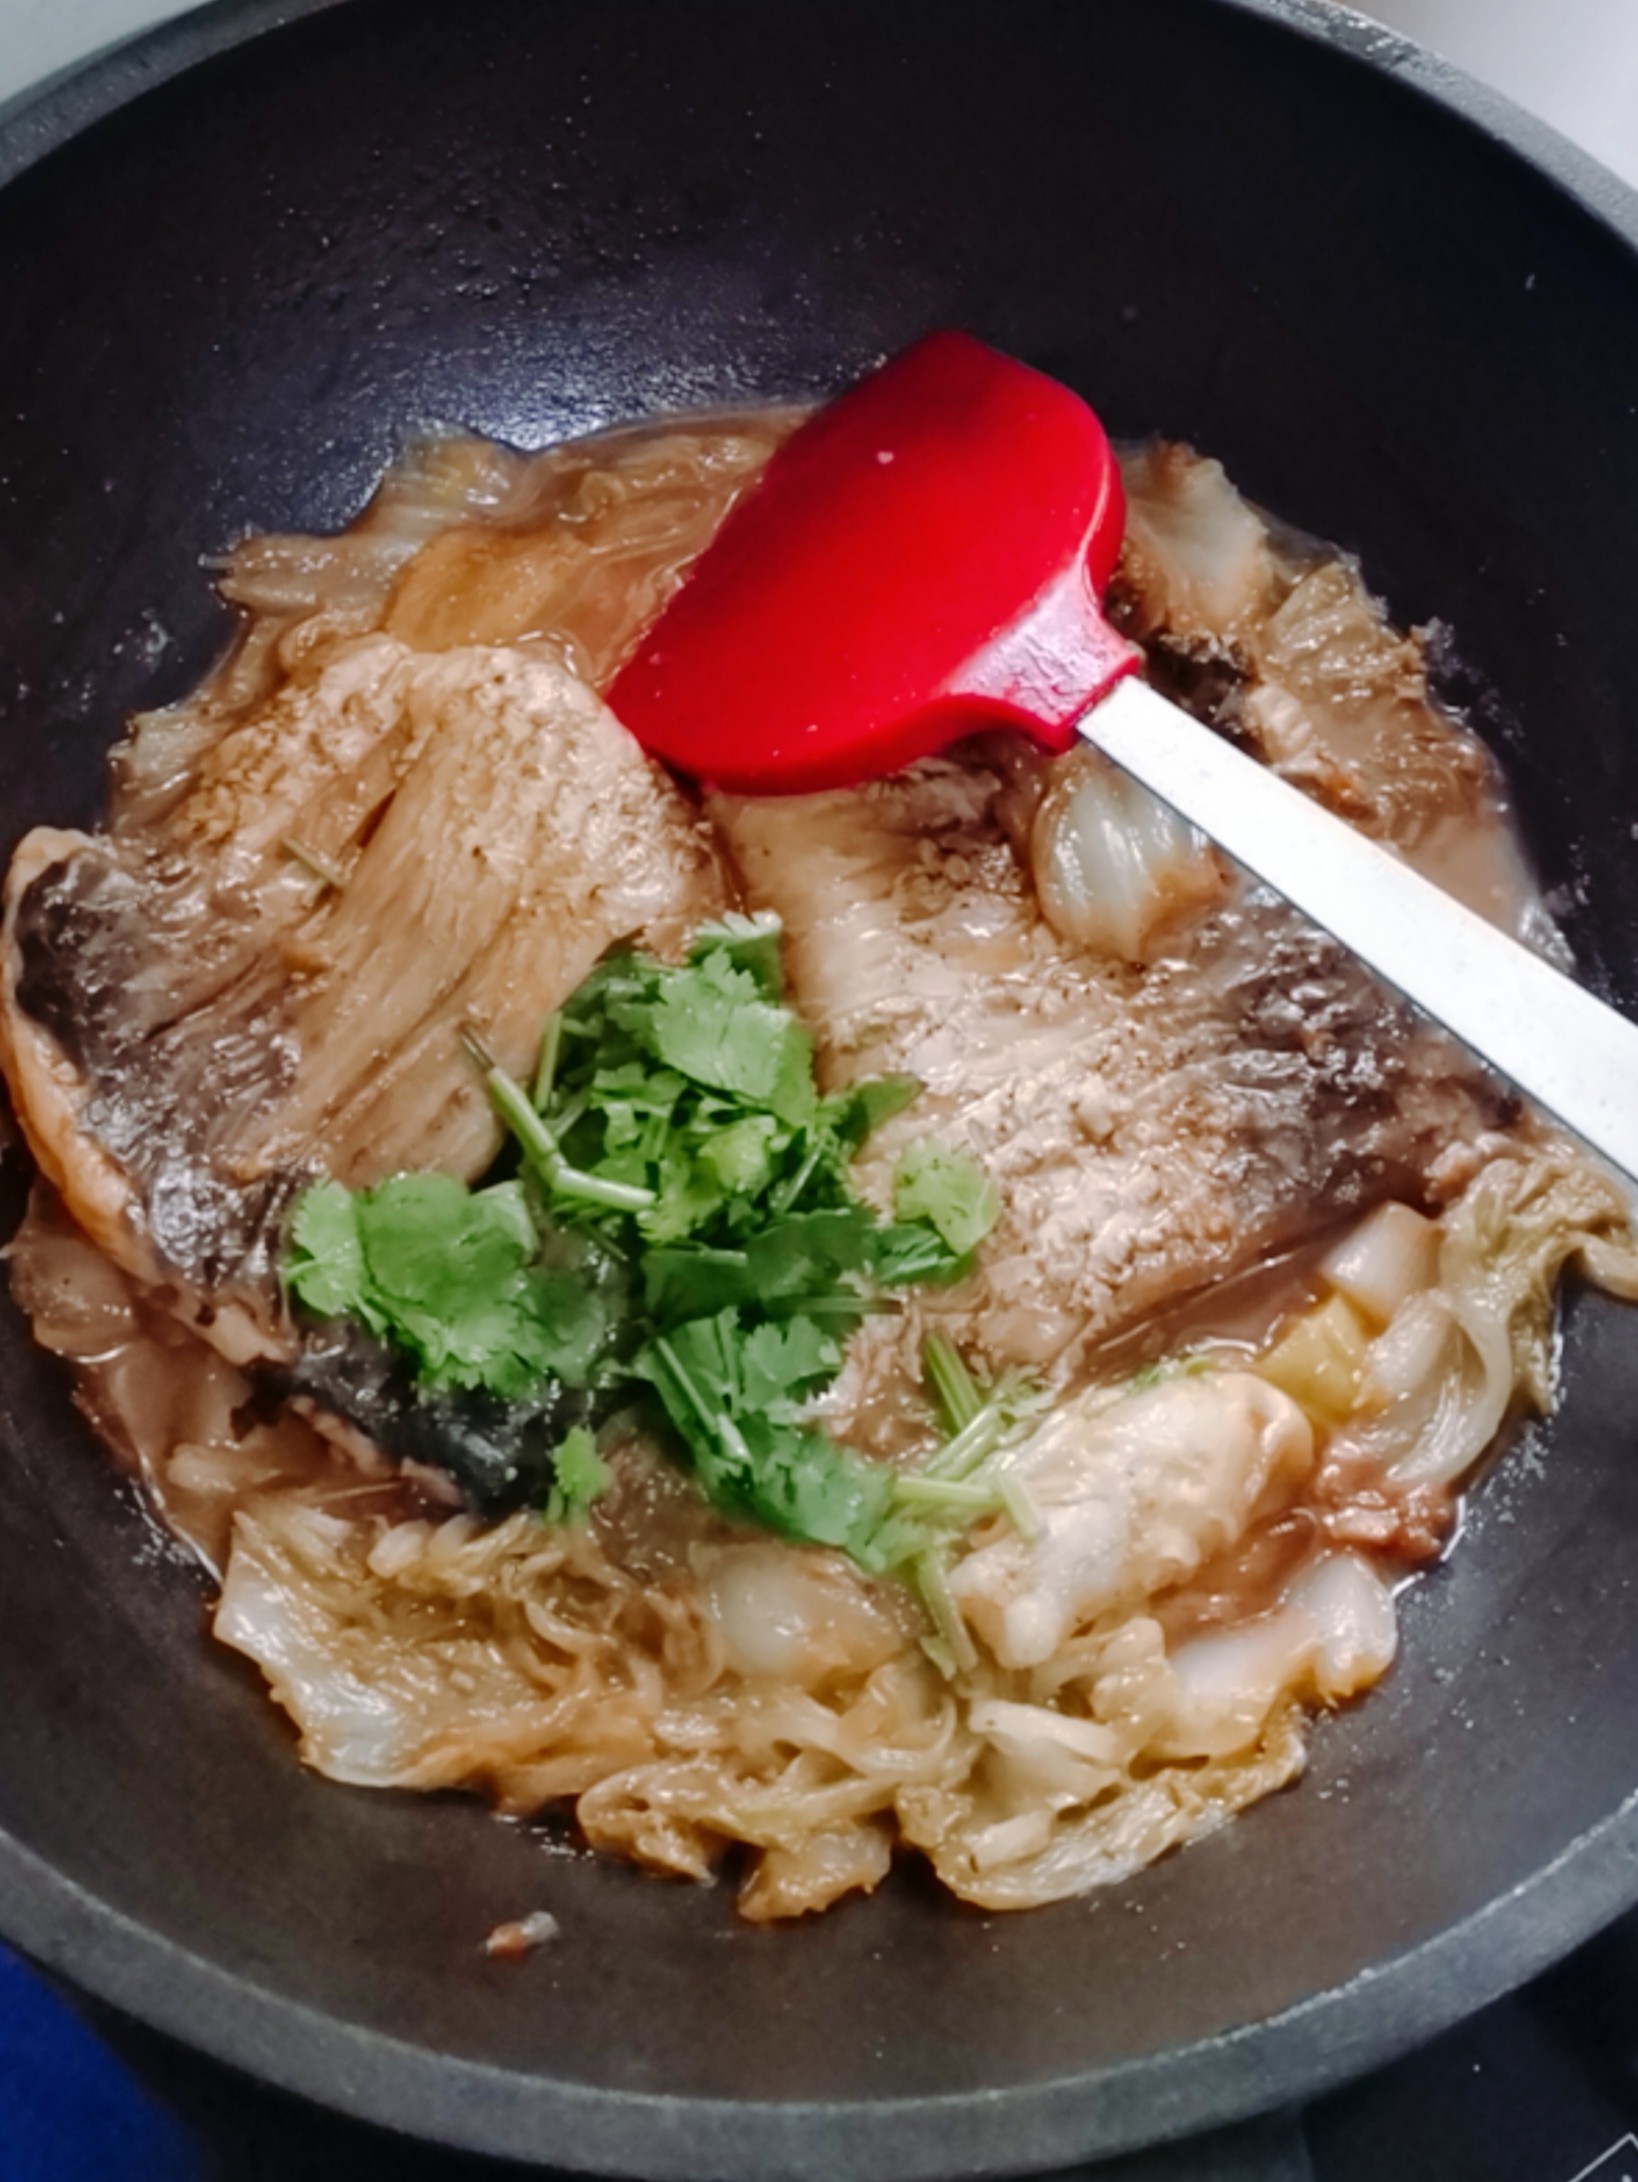 Ayu with Cabbage Sauce recipe